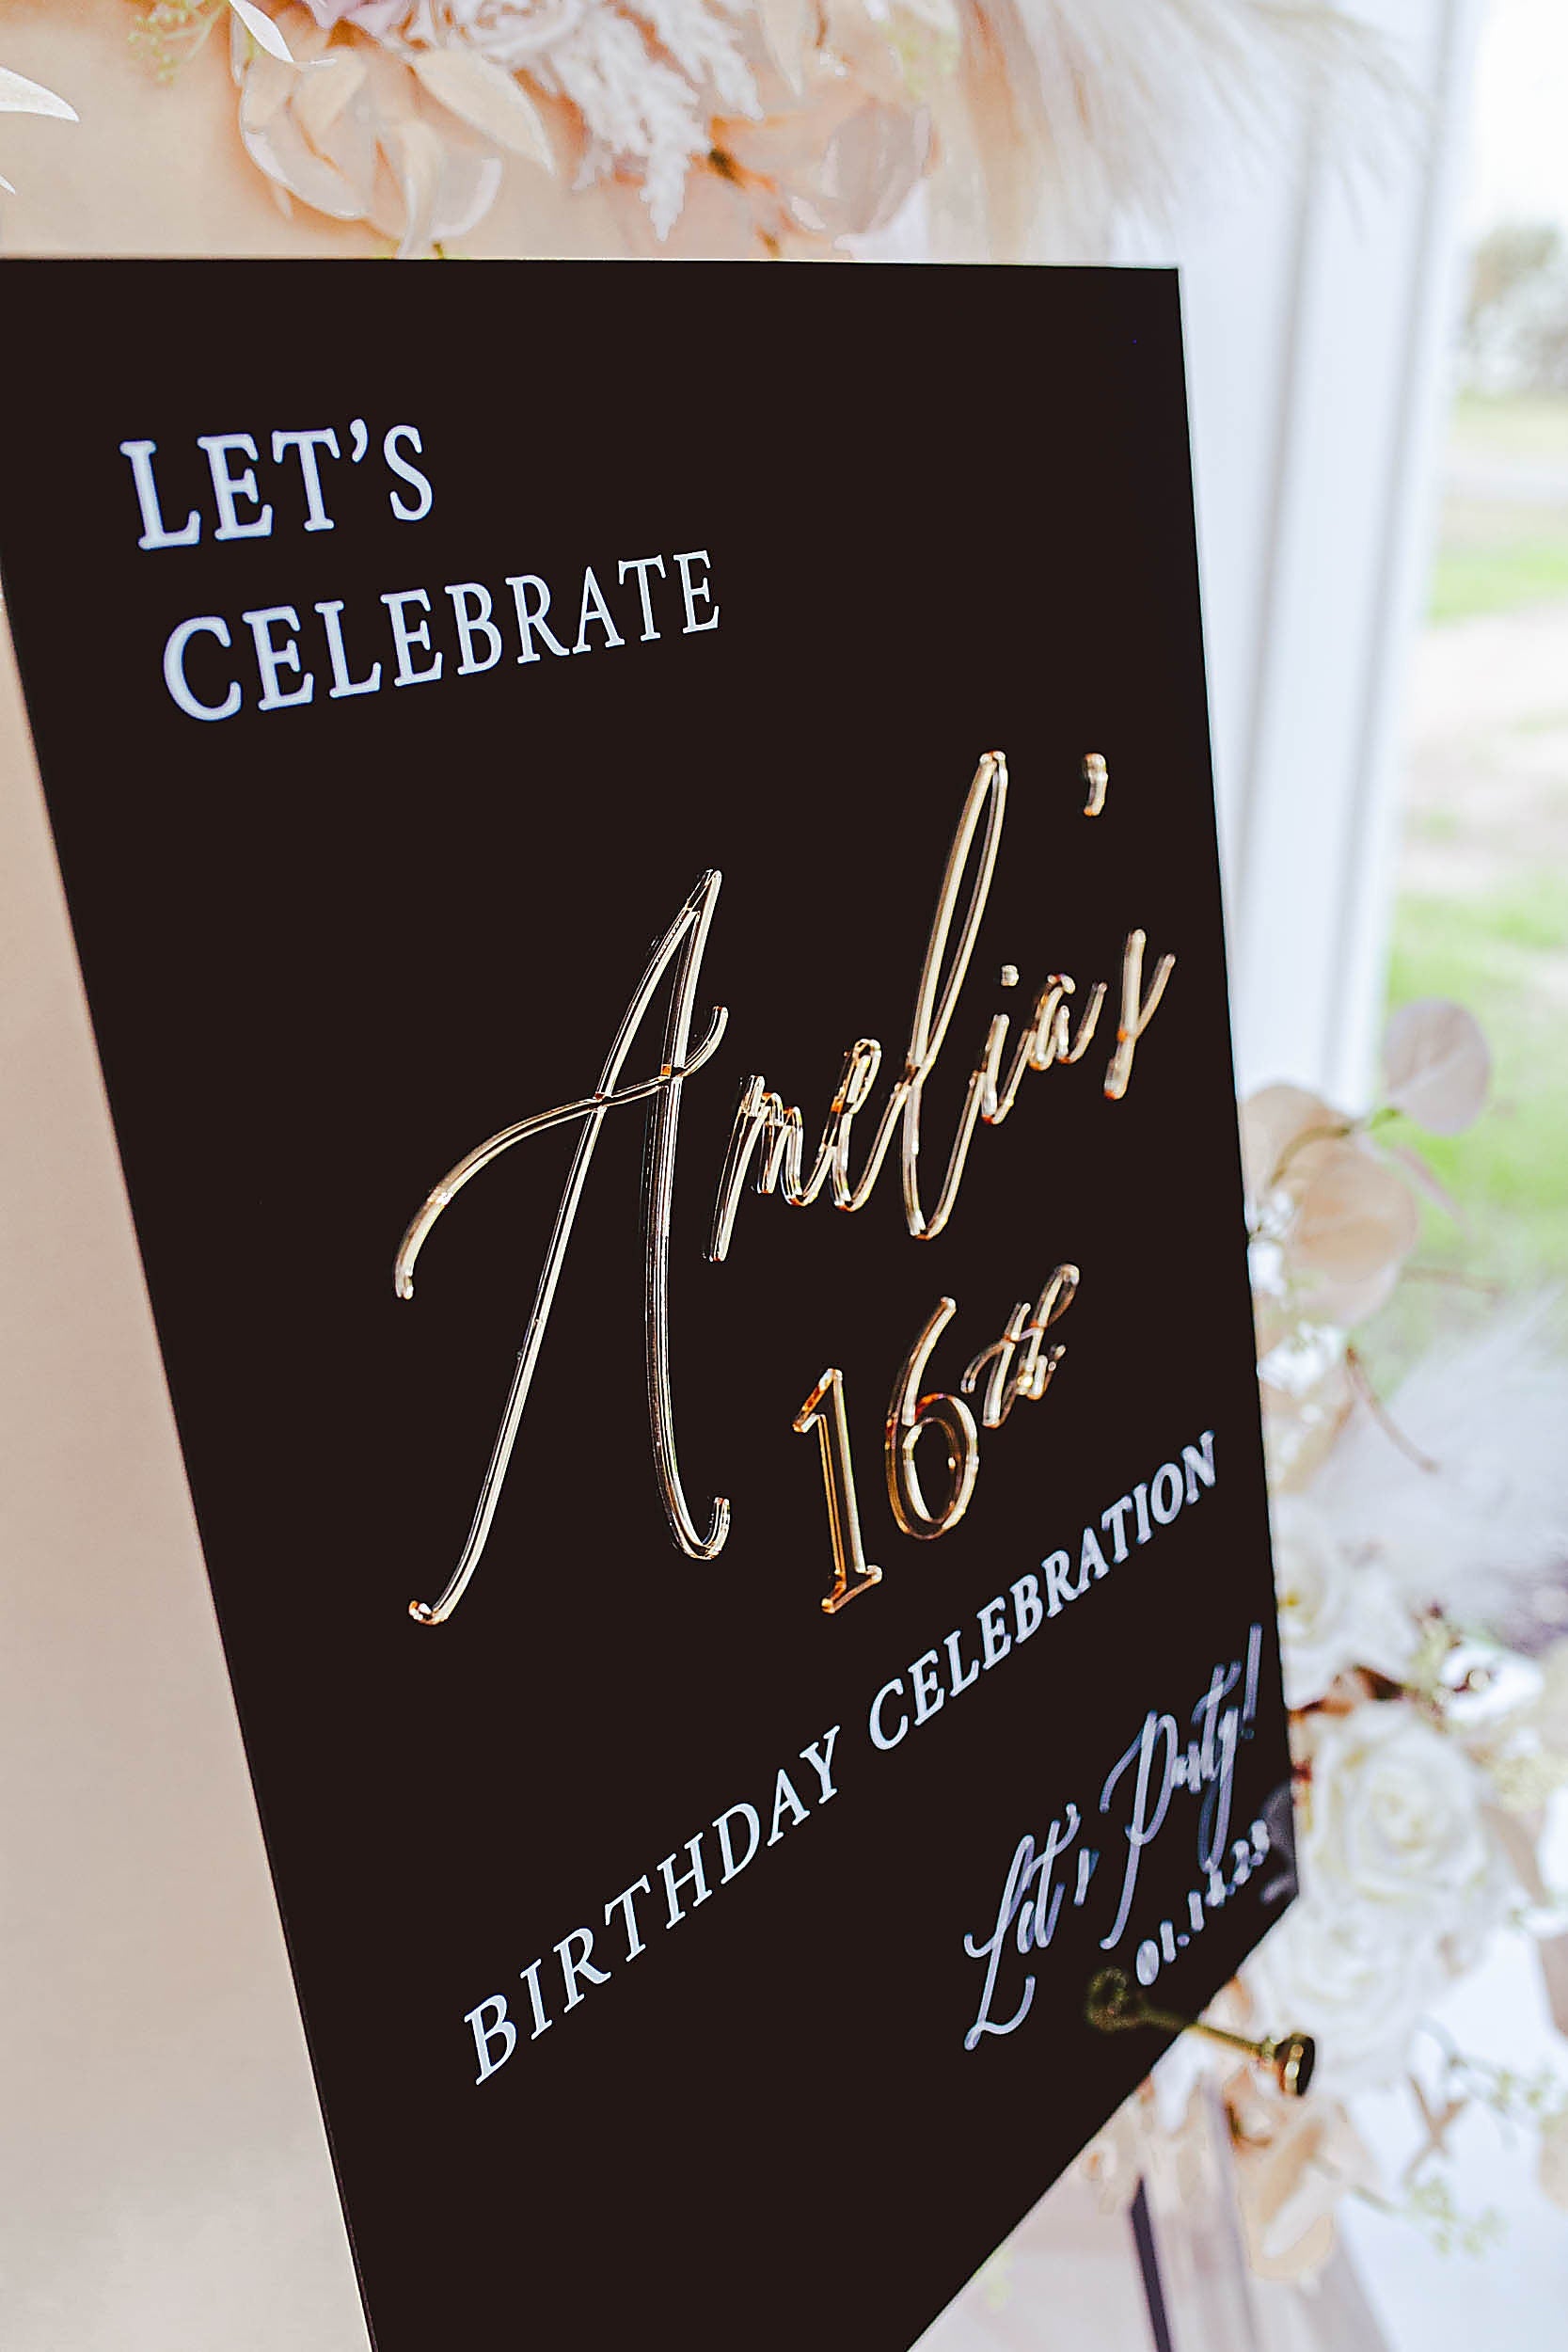 3DF4-ES1 3D Event Entry Signs with Laser Cut Wording - Sign Sizes 18"x24" or 24"x36"